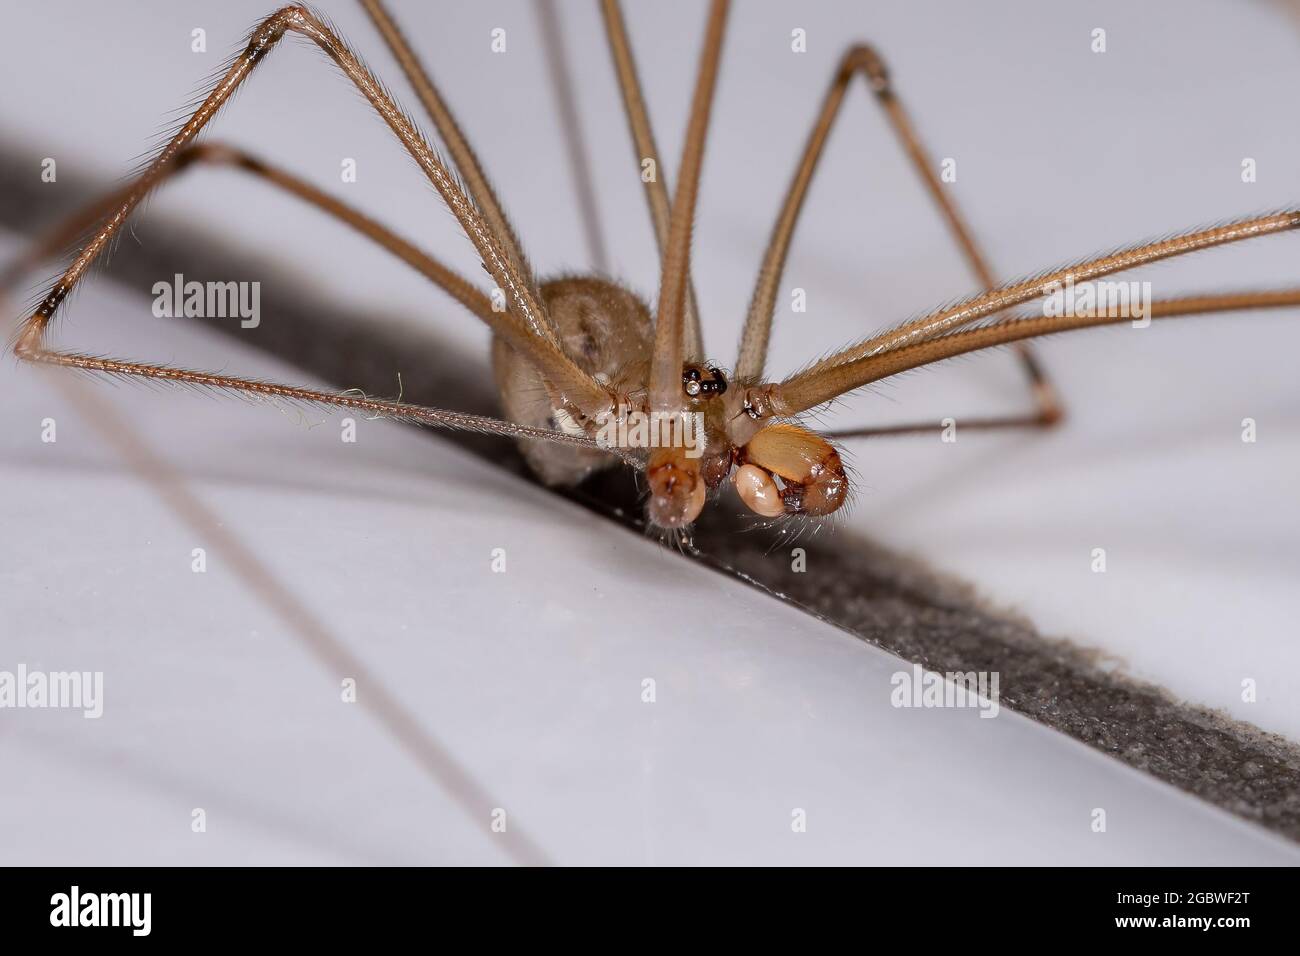 Adult Male Short-bodied Cellar Spider of the species Physocyclus globosus Stock Photo